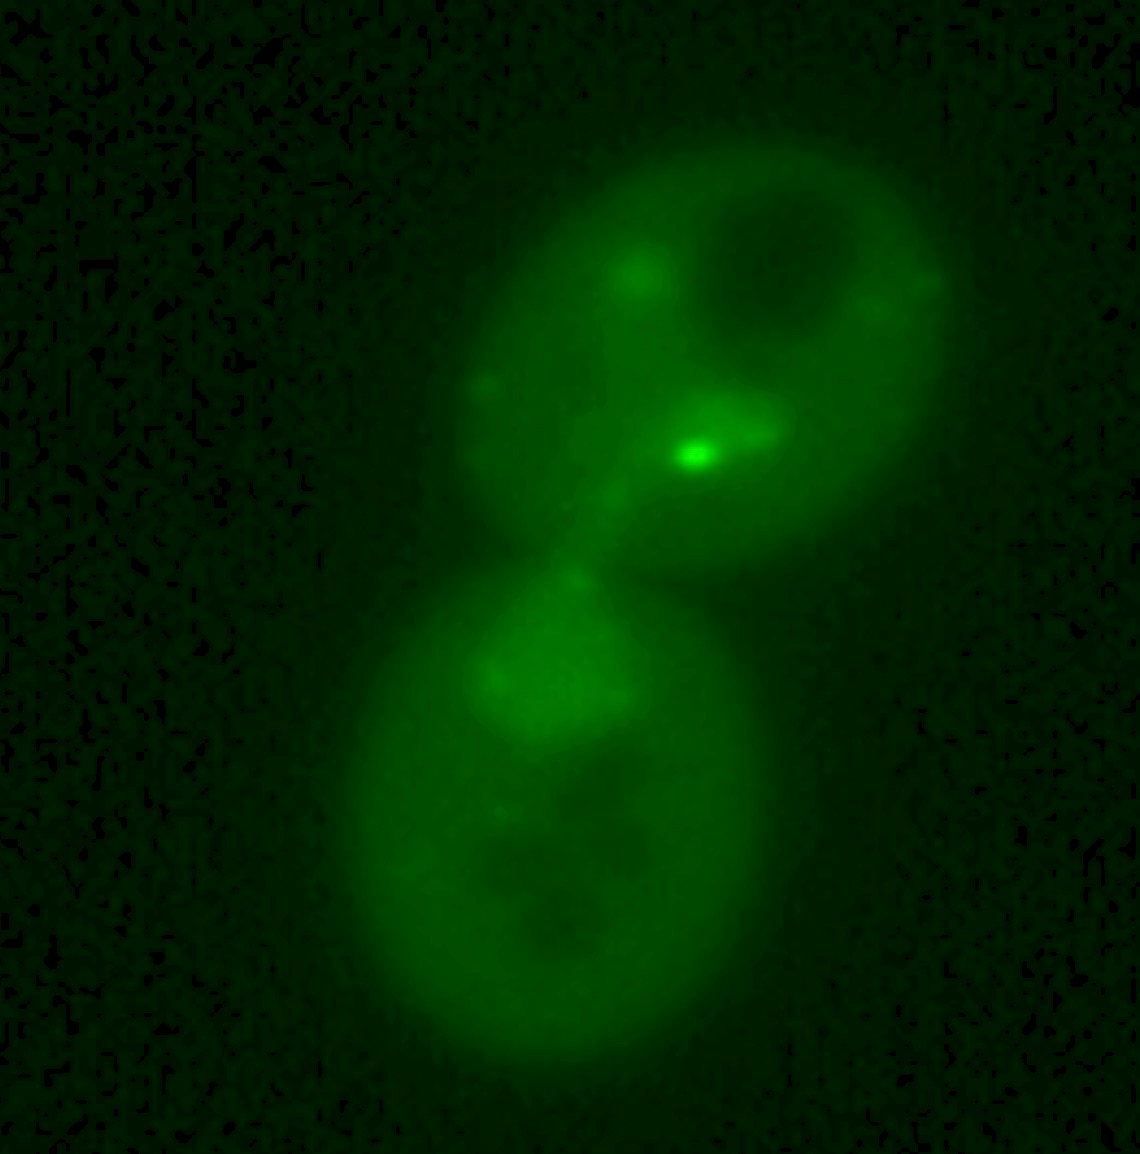 Imaging translation in a live dividing yeast cell.